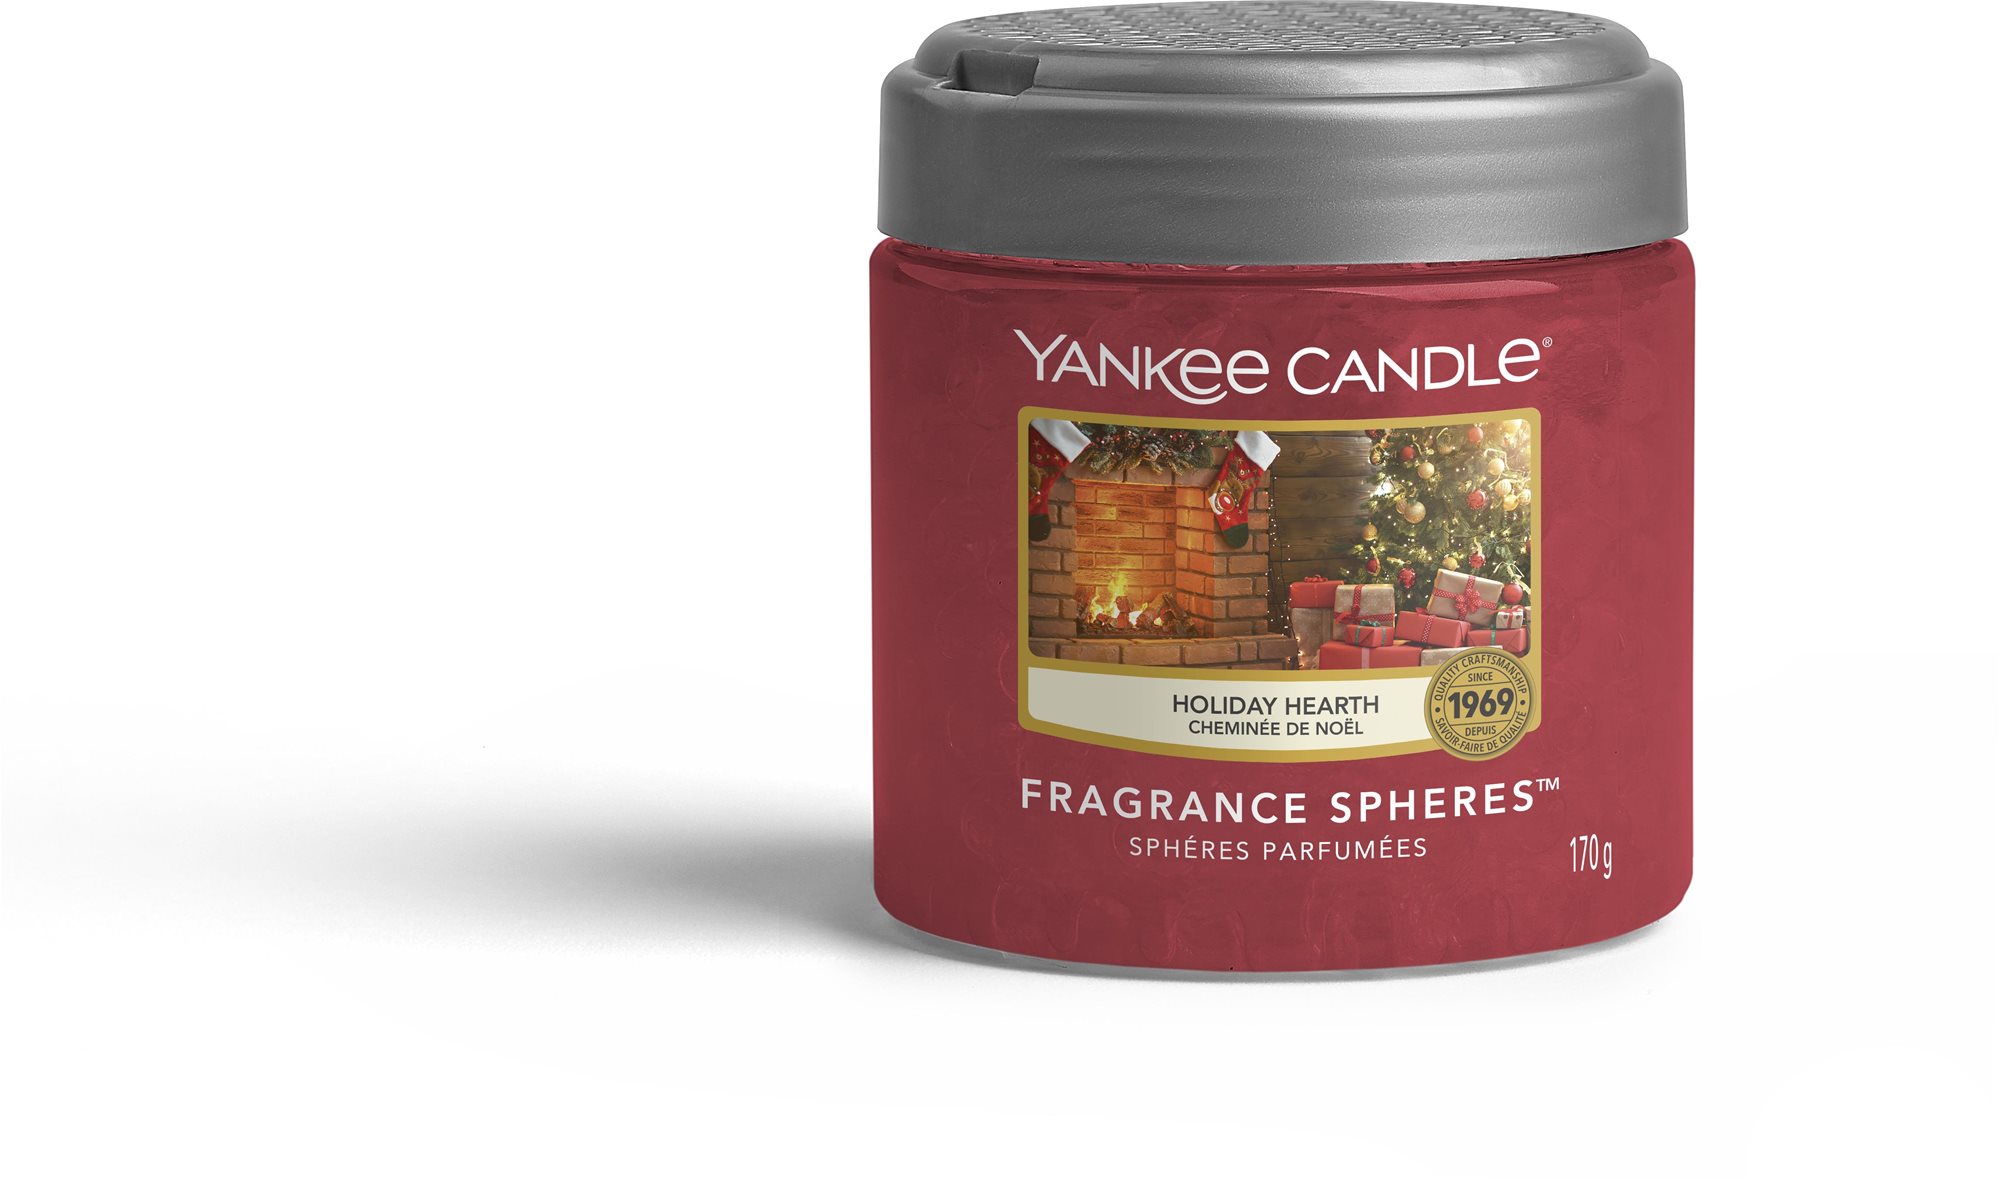 YANKEE CANDLE Holiday Hearth 170 g